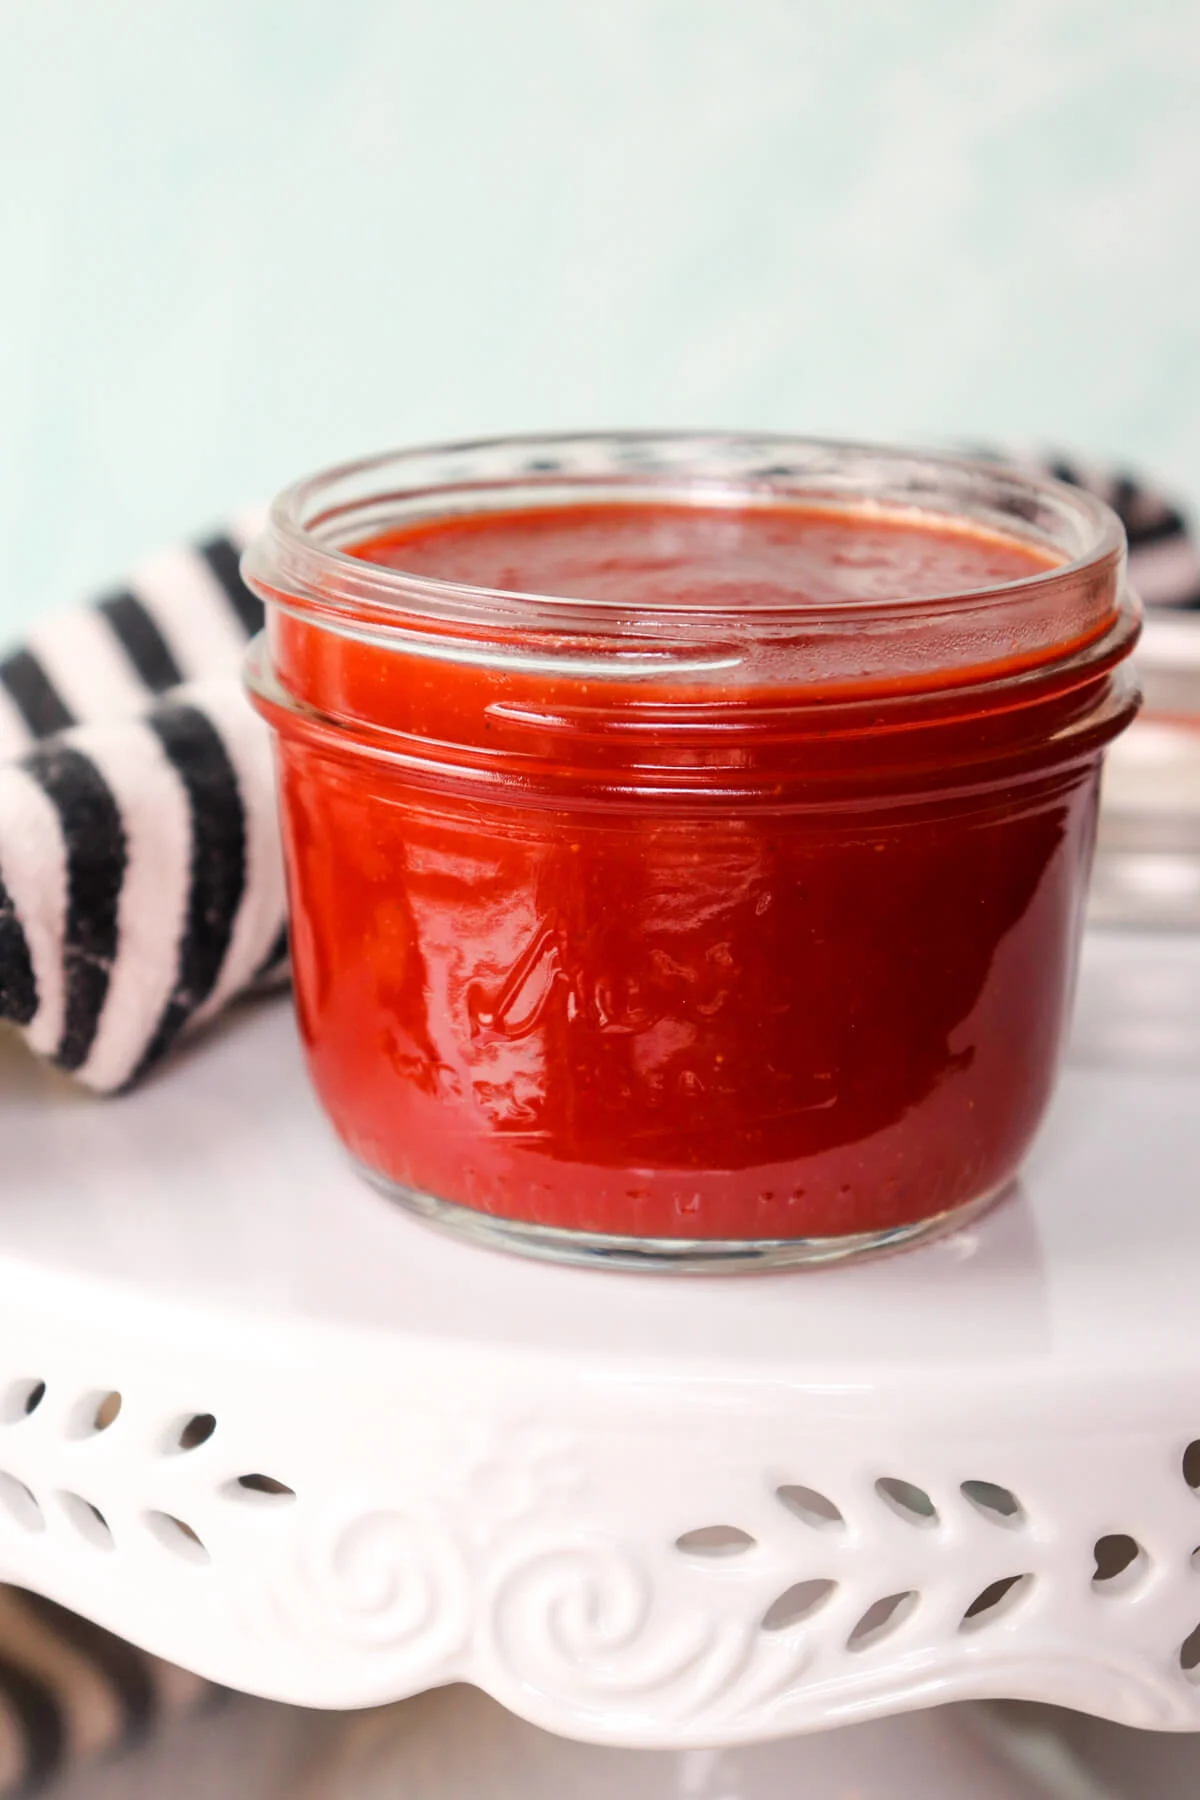 A glass jar of keto ketchup on a white stand with a black and white kitchen towel in the background.